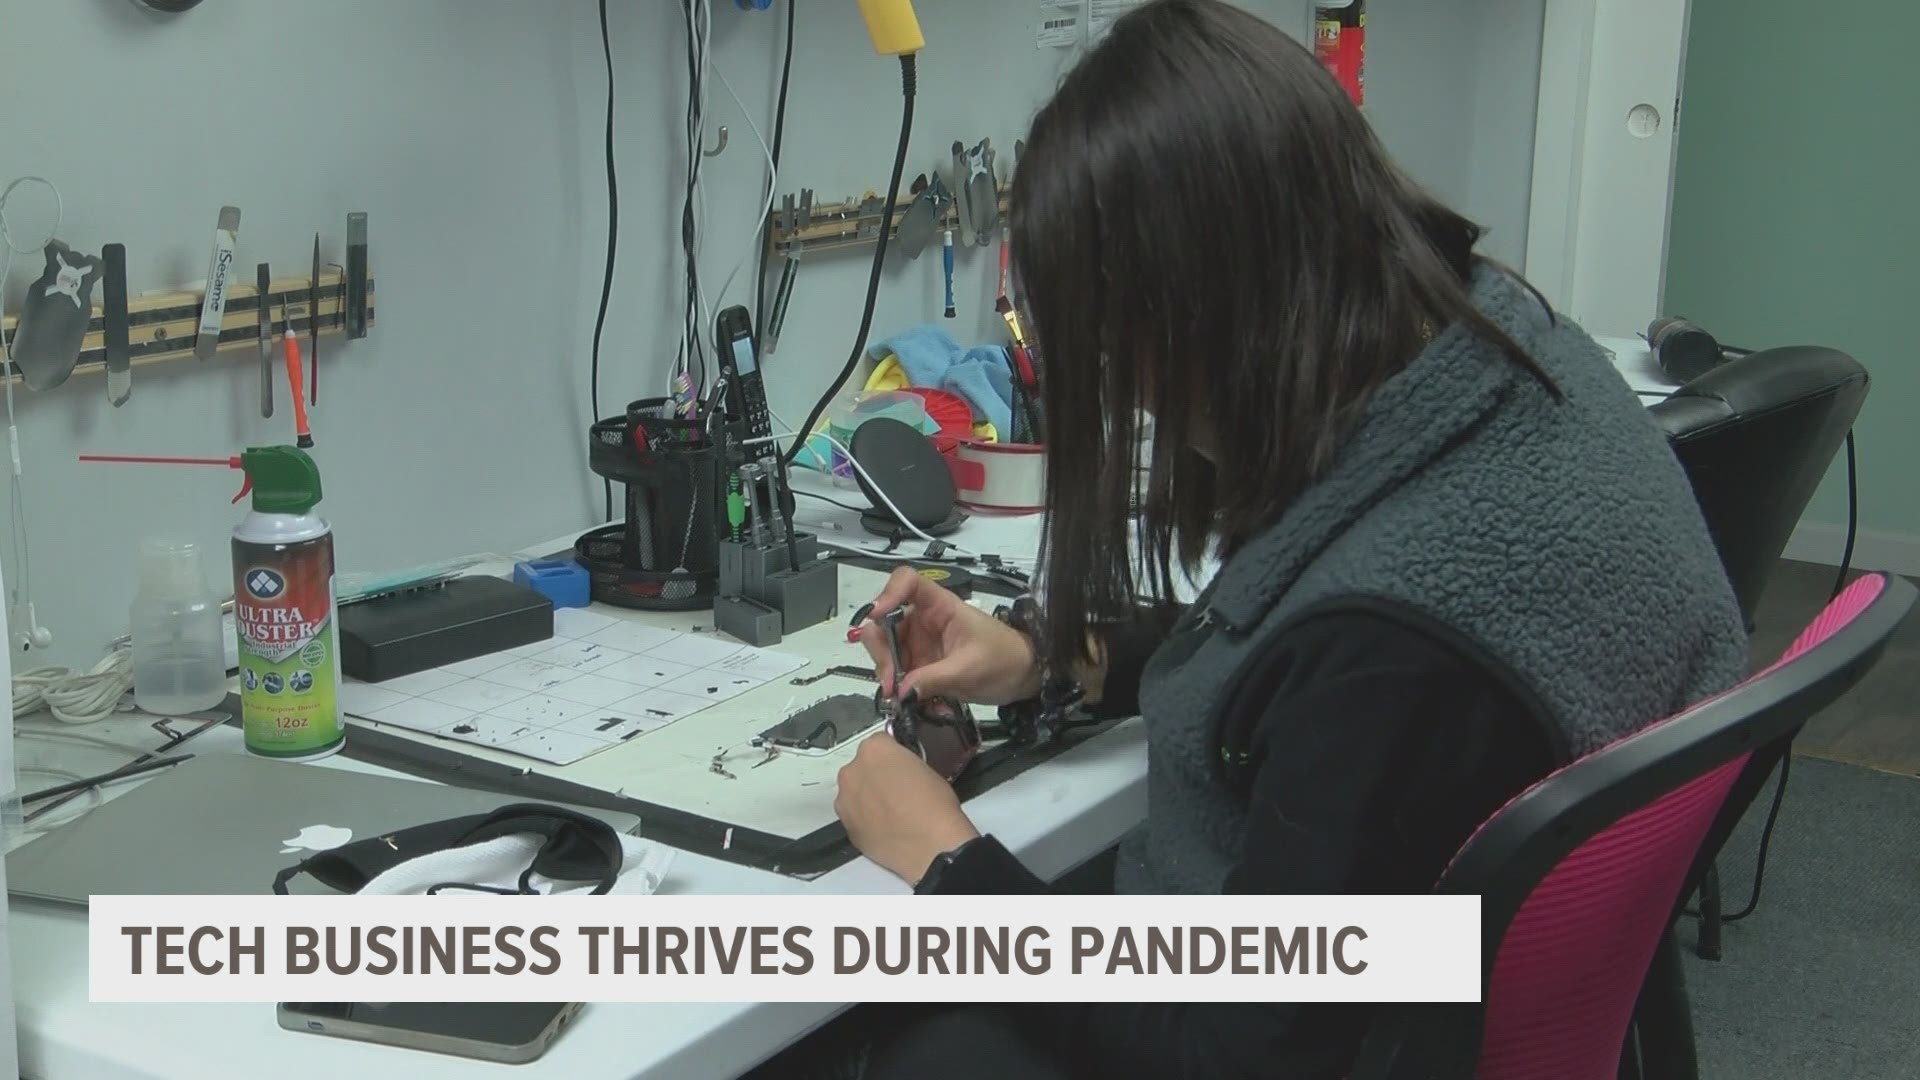 The pandemic was difficult for many small businesses around the country but tech shops are thriving.